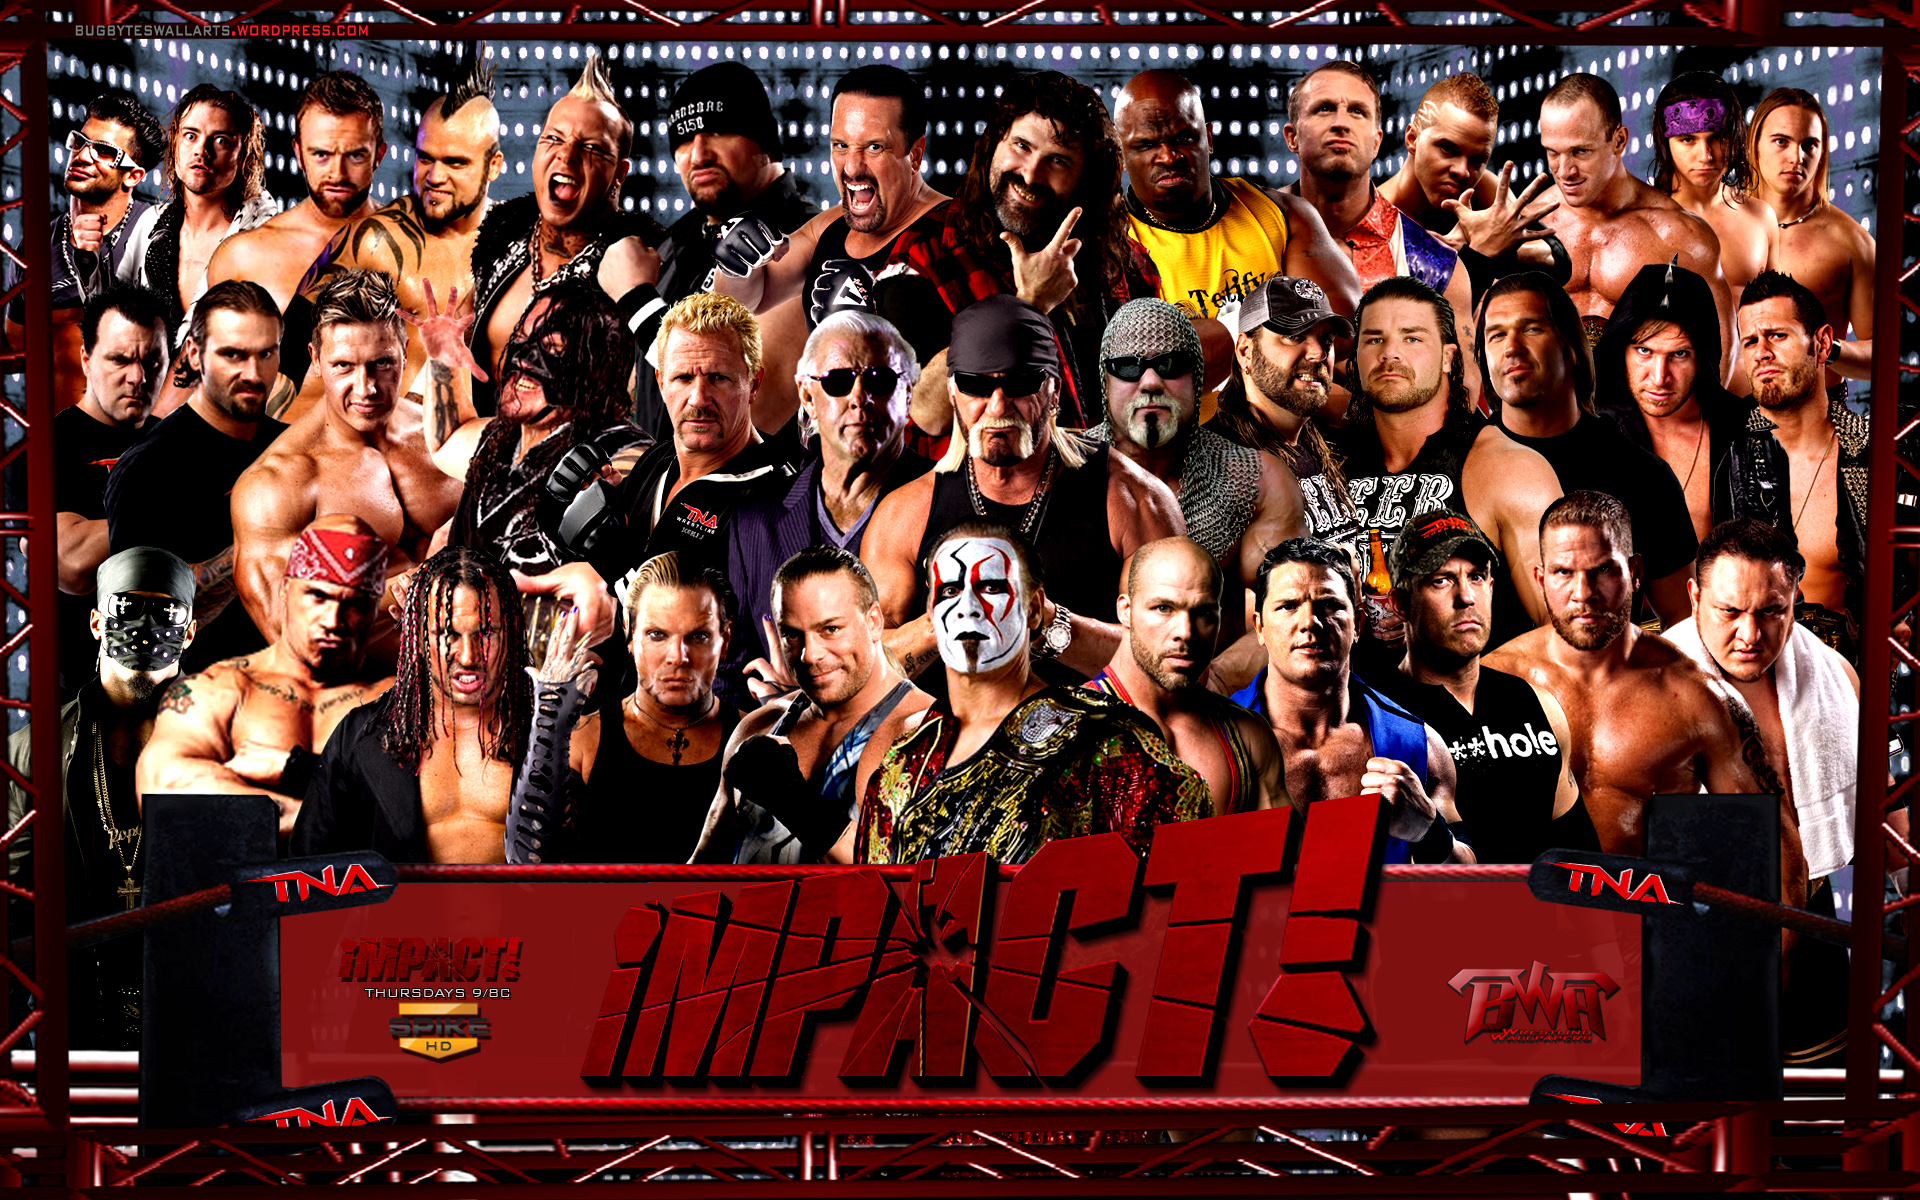 Stop Comparing TNA to WCW.